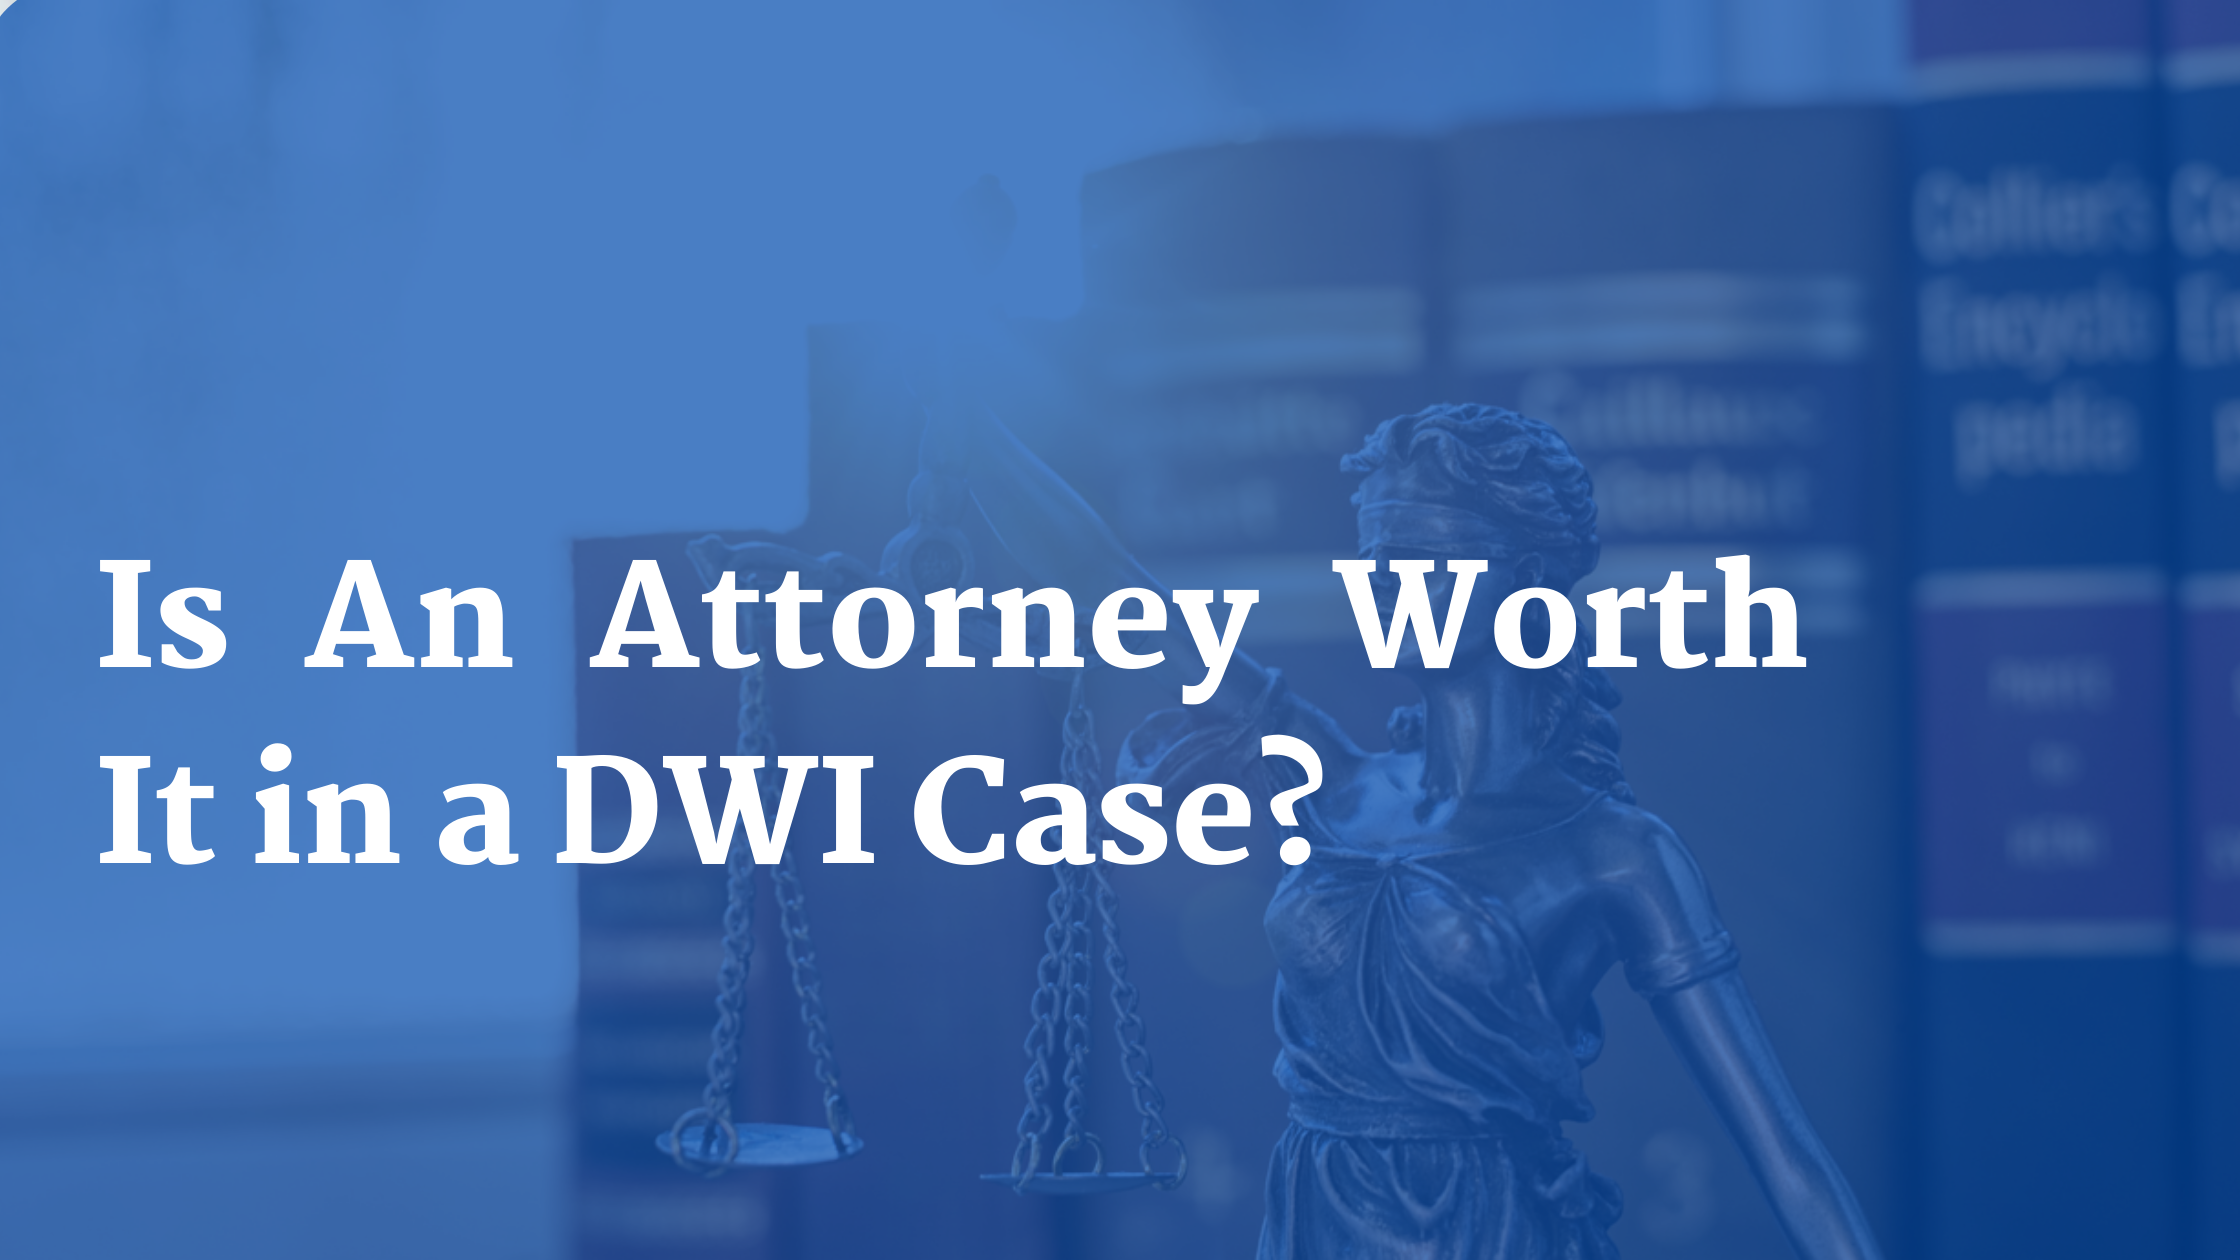 is-an-attorney-worth-it-in-a-dwi-case